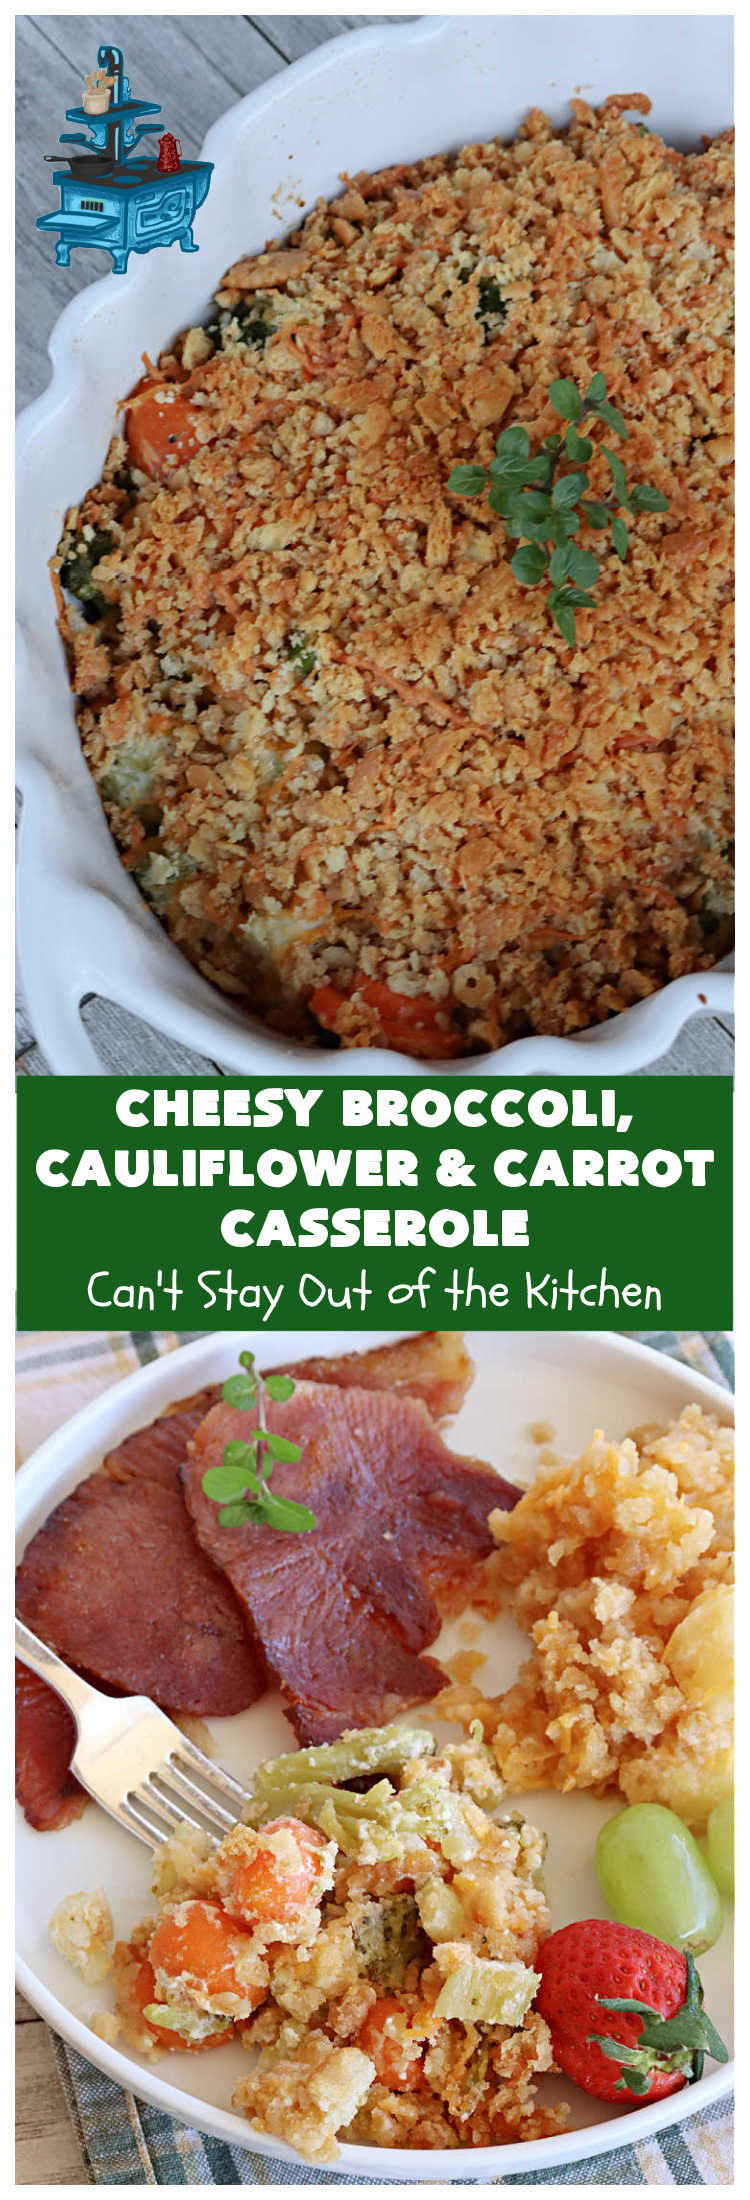 Cheesy Broccoli, Cauliflower and Carrot Casserole | Can't Stay Out of the Kitchen | this tasty #SideDish includes #broccoli, #carrots #cauliflower & #celery in a tasty #CheddarCheese sauce topped with #RitzCrackers & more #cheese. It's marvelous for #holiday or company dinners like #Easter, #MothersDay or #FathersDay. #casserole #CheesyBroccoliCauliflowerAndCarrotCasserole #vegetable